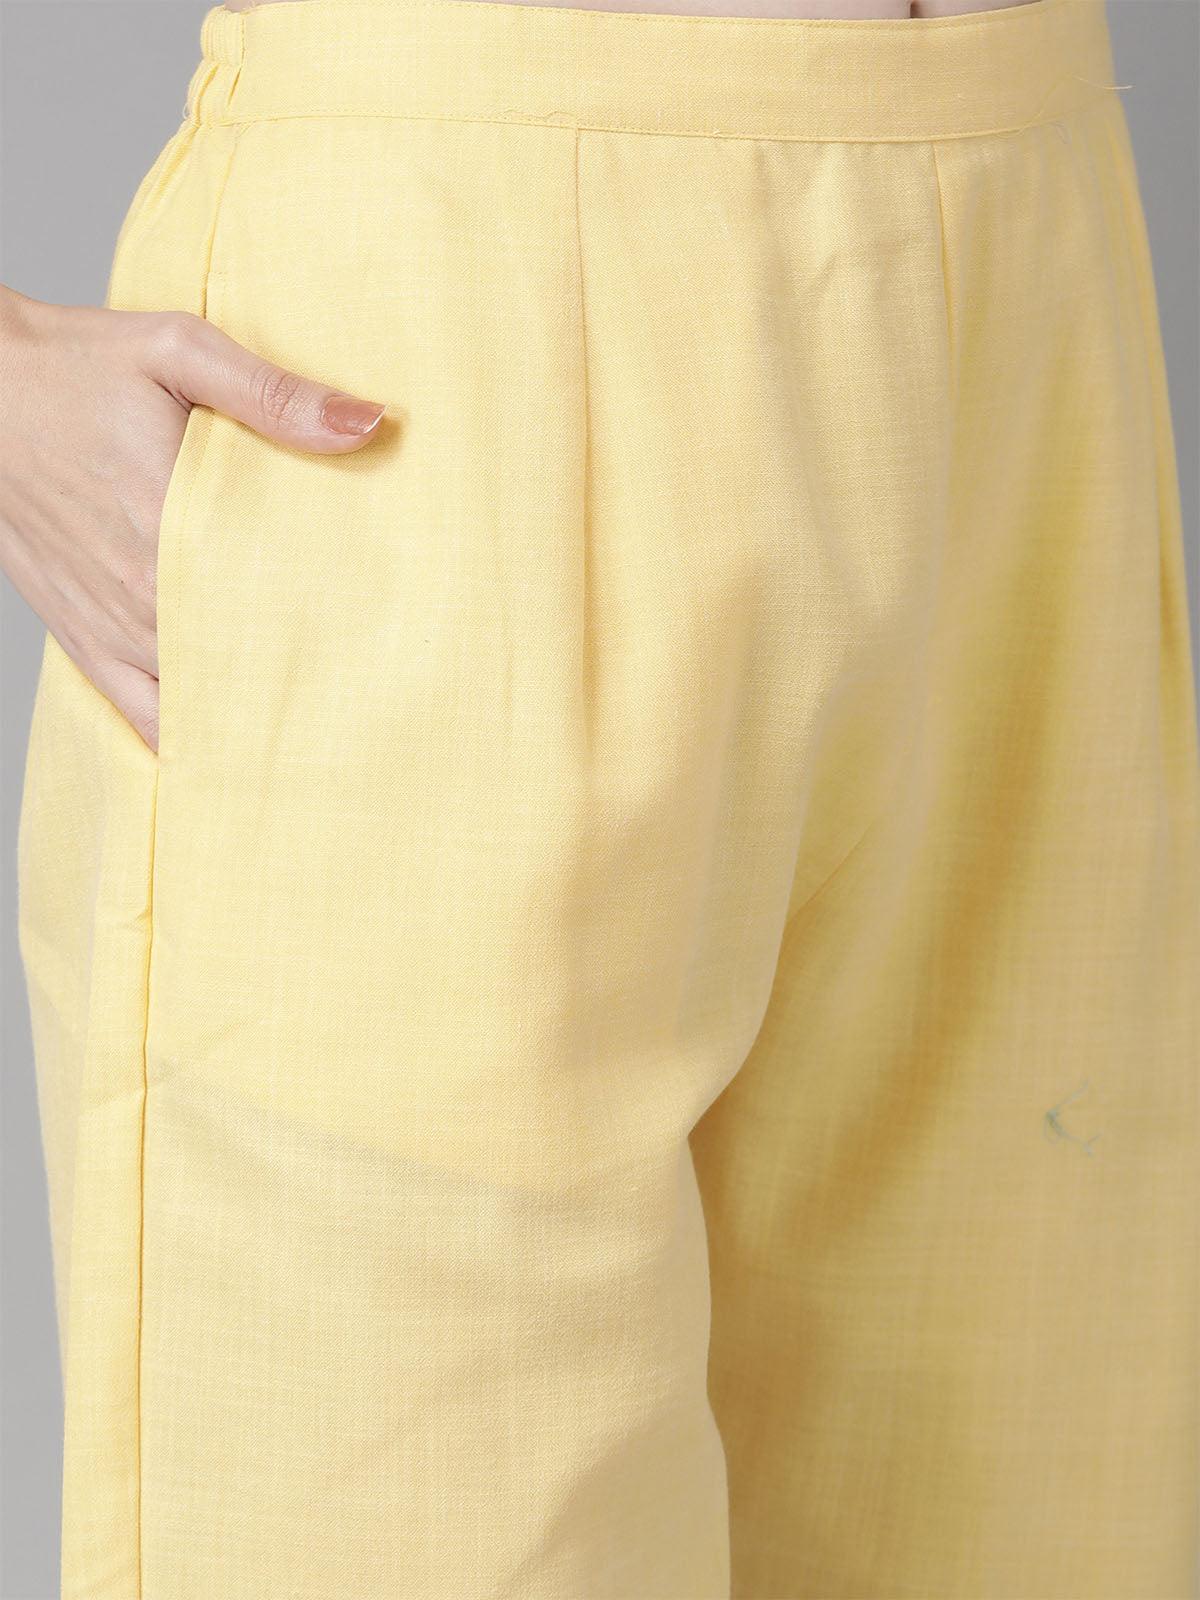 Off White Embroidered Straight Kurta with yellow Palazzo and Dupatta Set - Odette